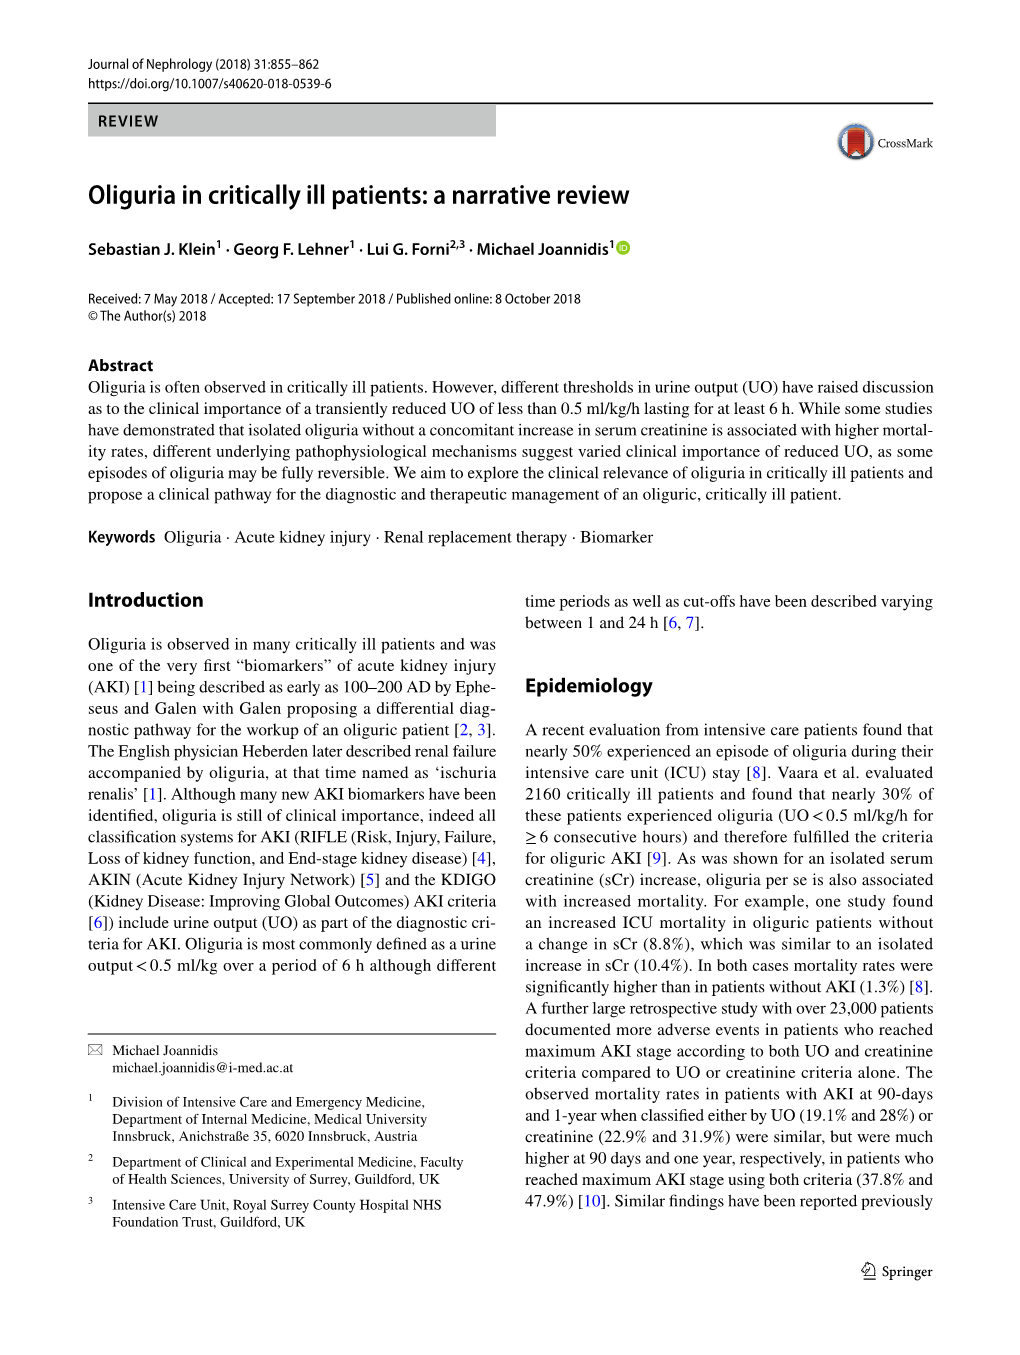 Oliguria in Critically Ill Patients: a Narrative Review